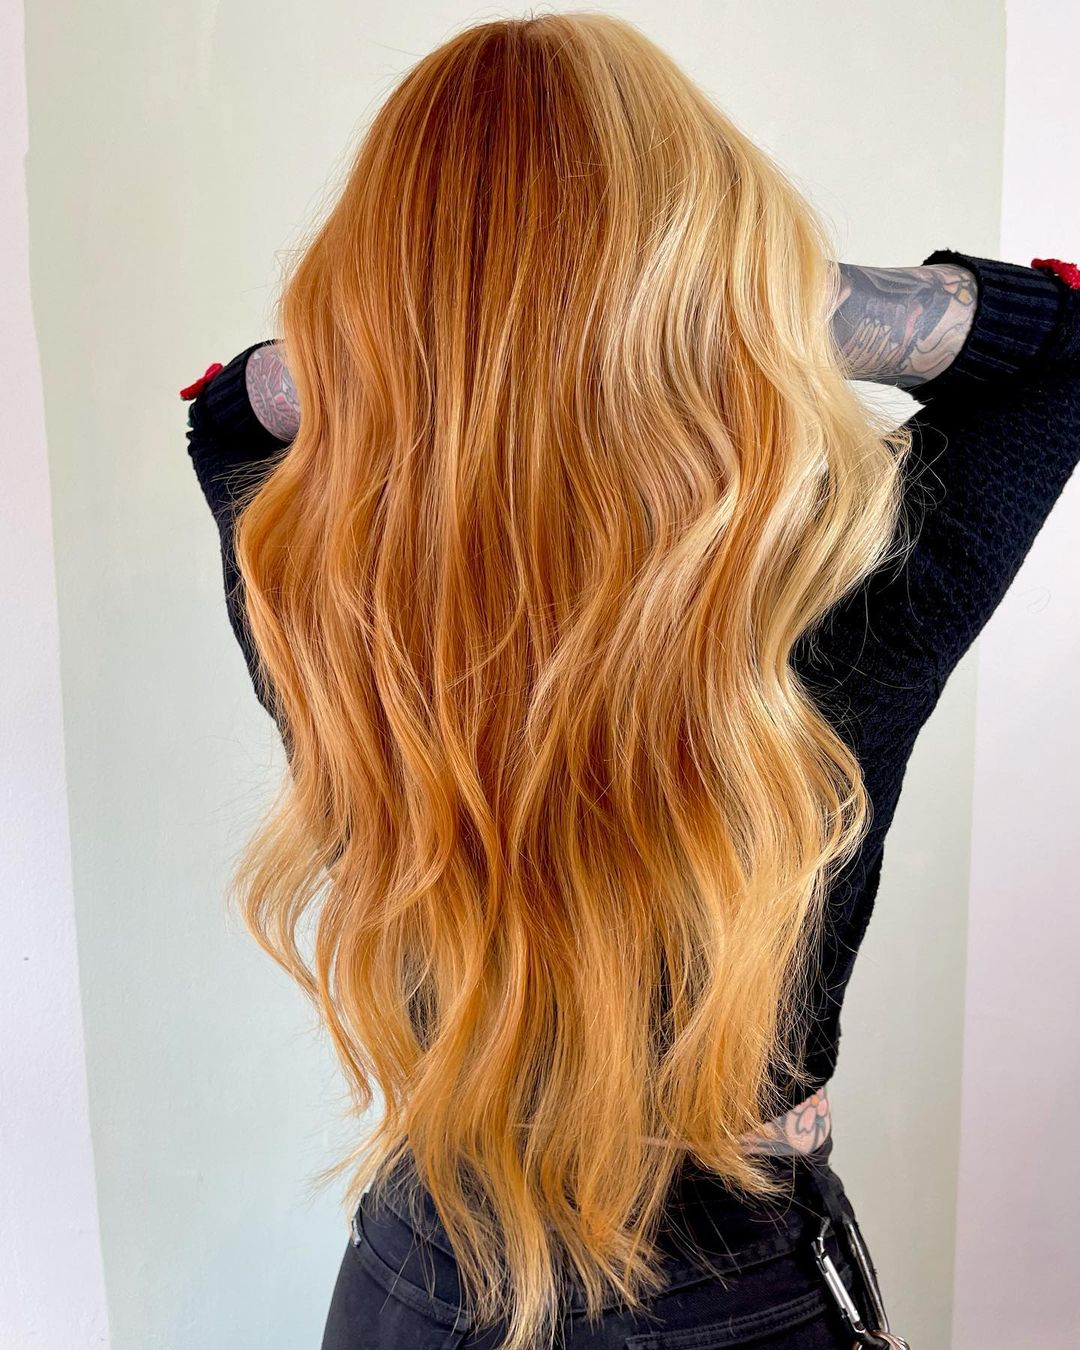 Marigold Blonde Color on Long Straight Hair